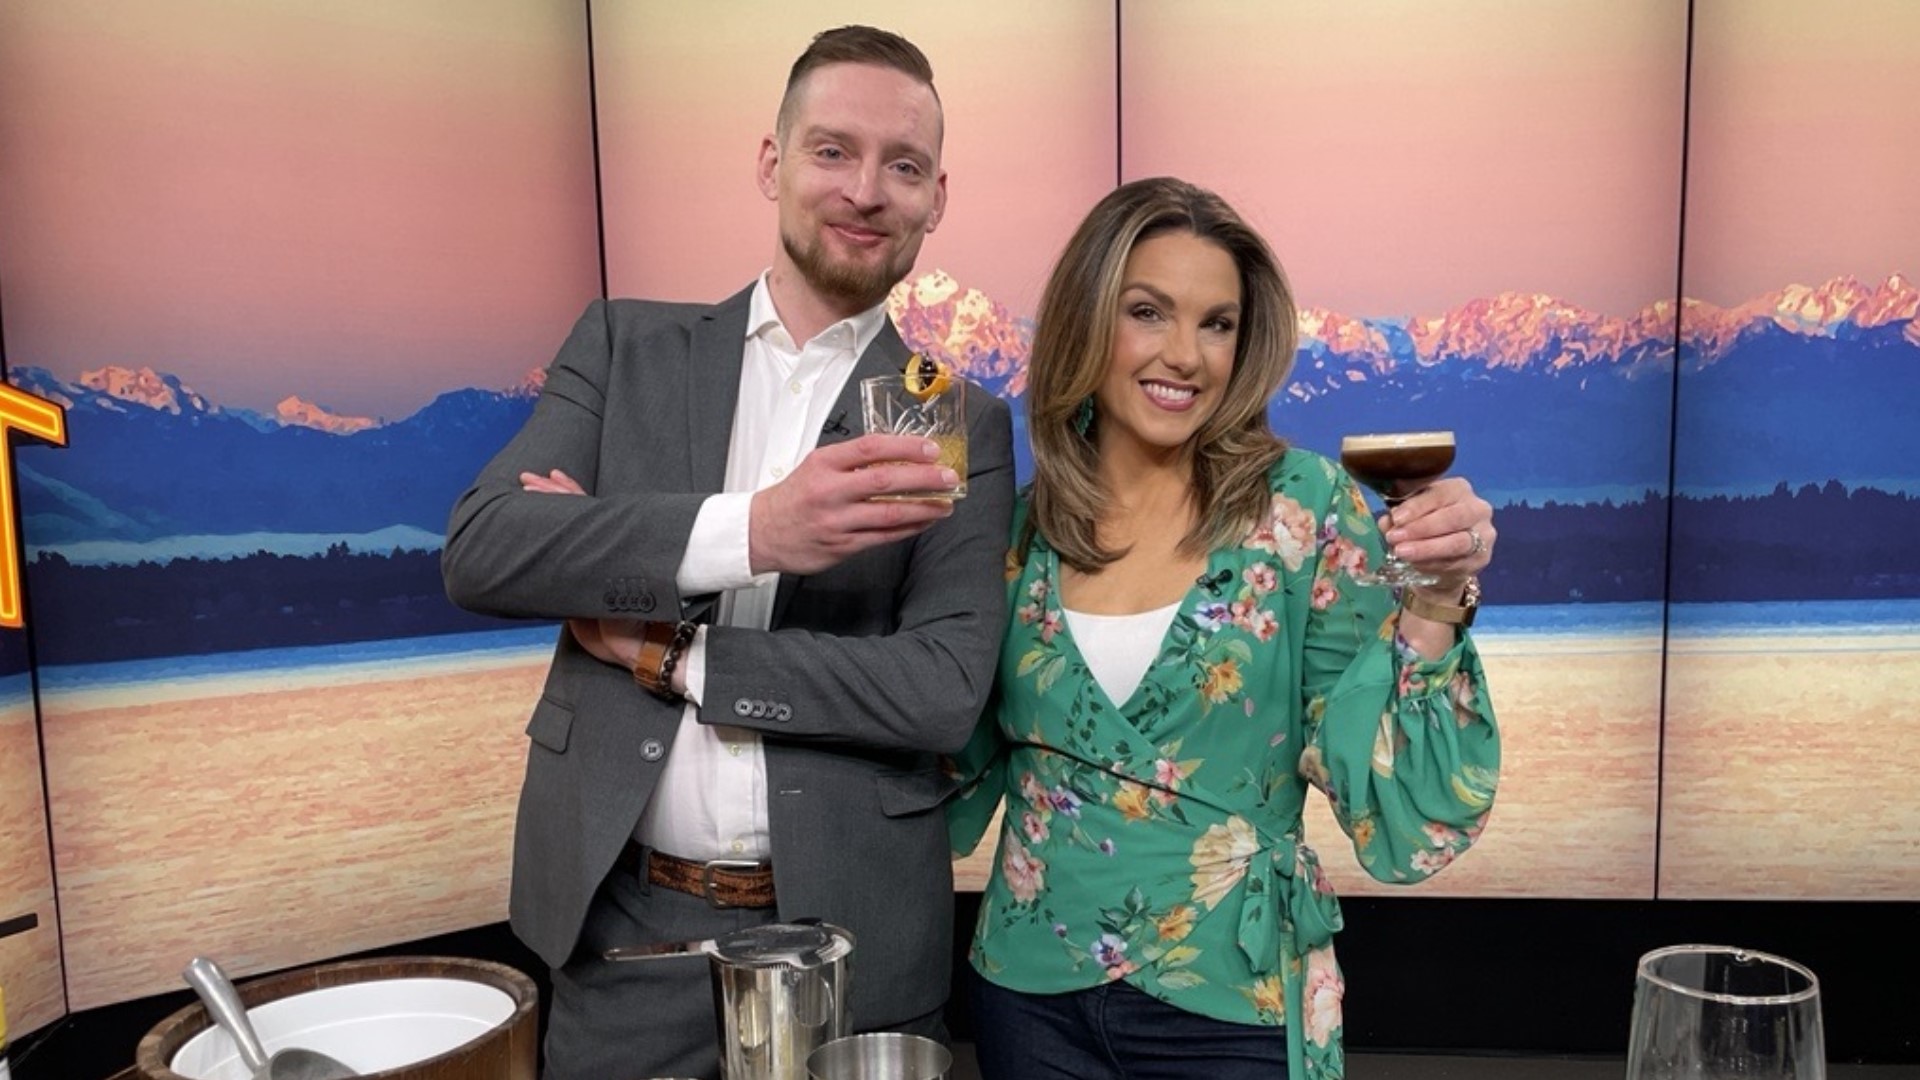 Friday, May 13th is World Cocktail Day and Sander Raav from Seattle Bartending Company made us three cocktails from three countries. #newdaynw